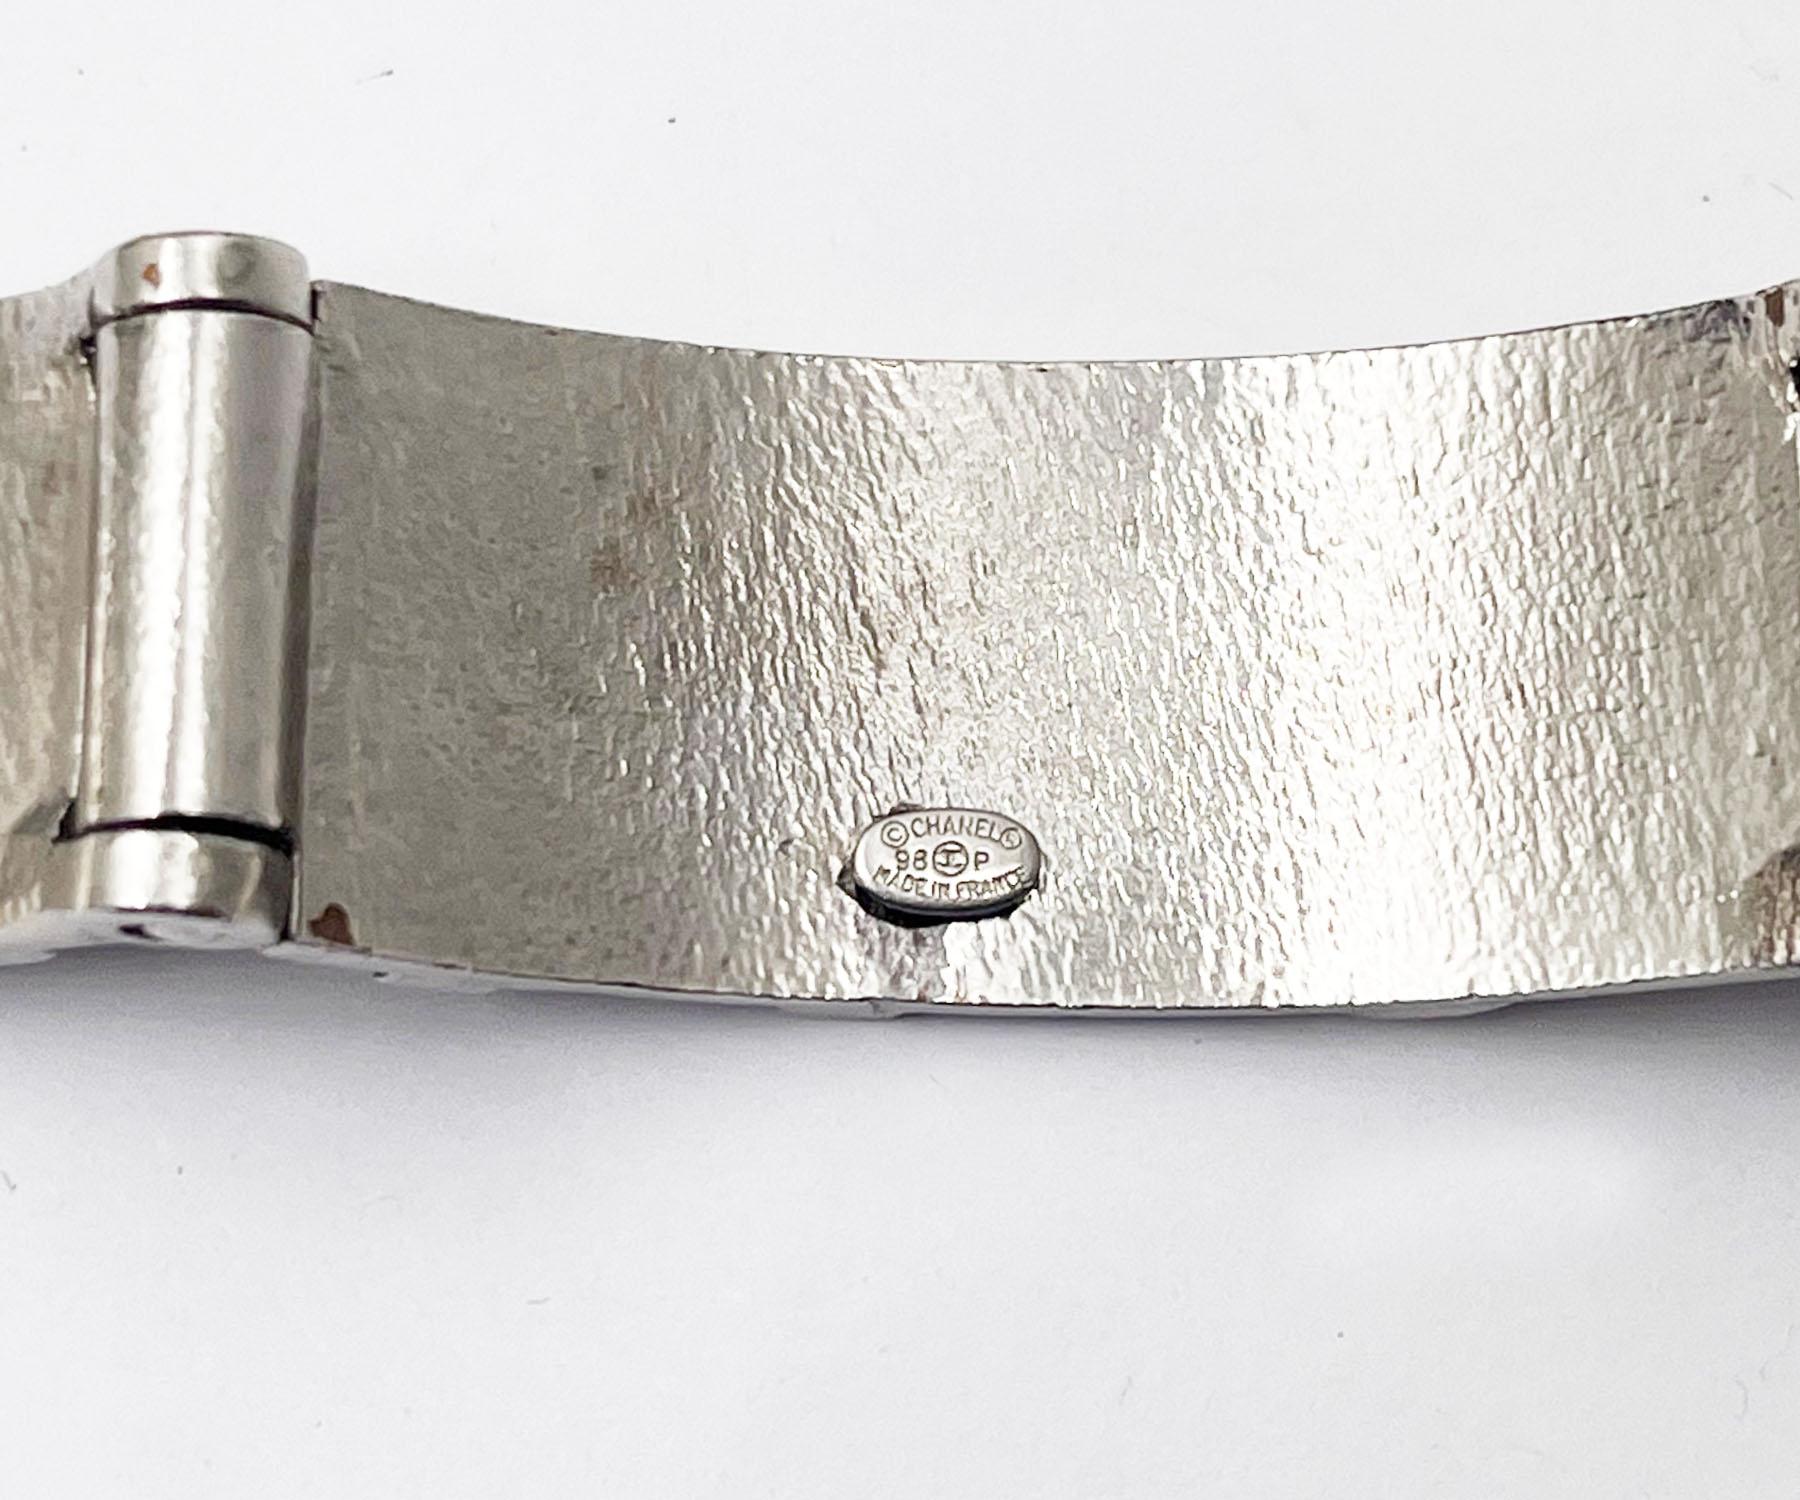 Chanel Rare Silver CC Letter Cuff Link Bracelet   In Excellent Condition For Sale In Pasadena, CA